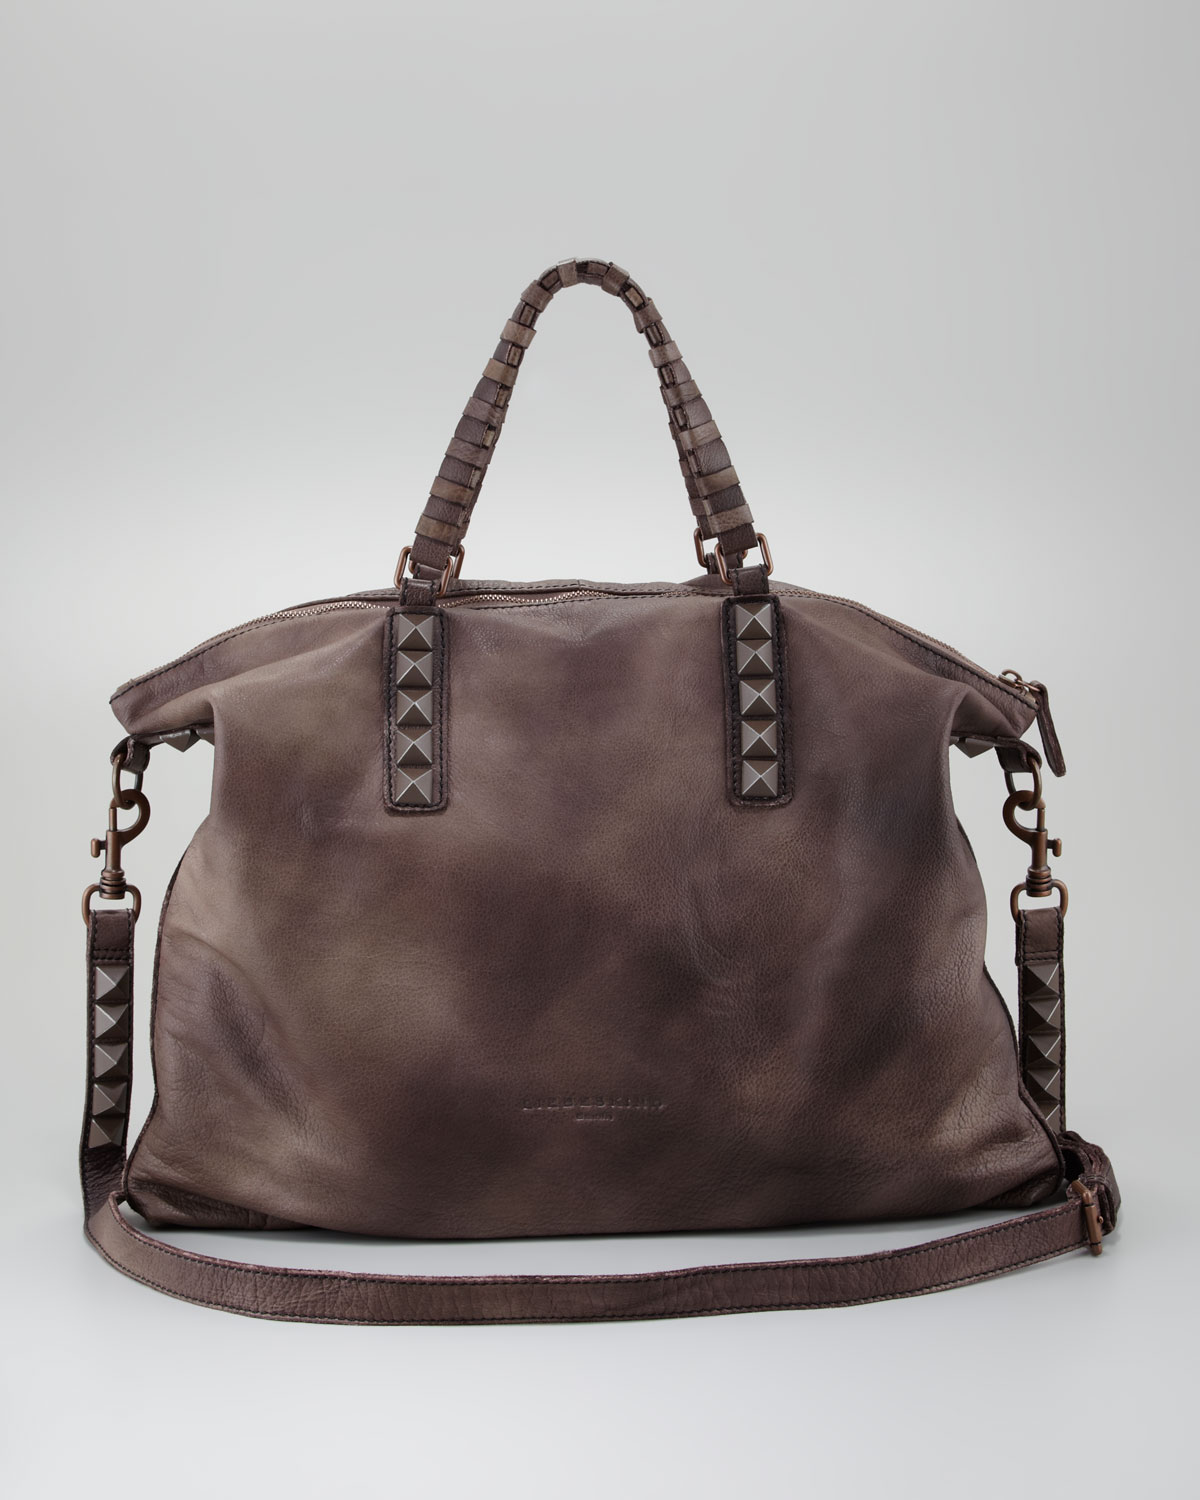 Lyst - Liebeskind Sandrine Studded Tote Bags in Brown